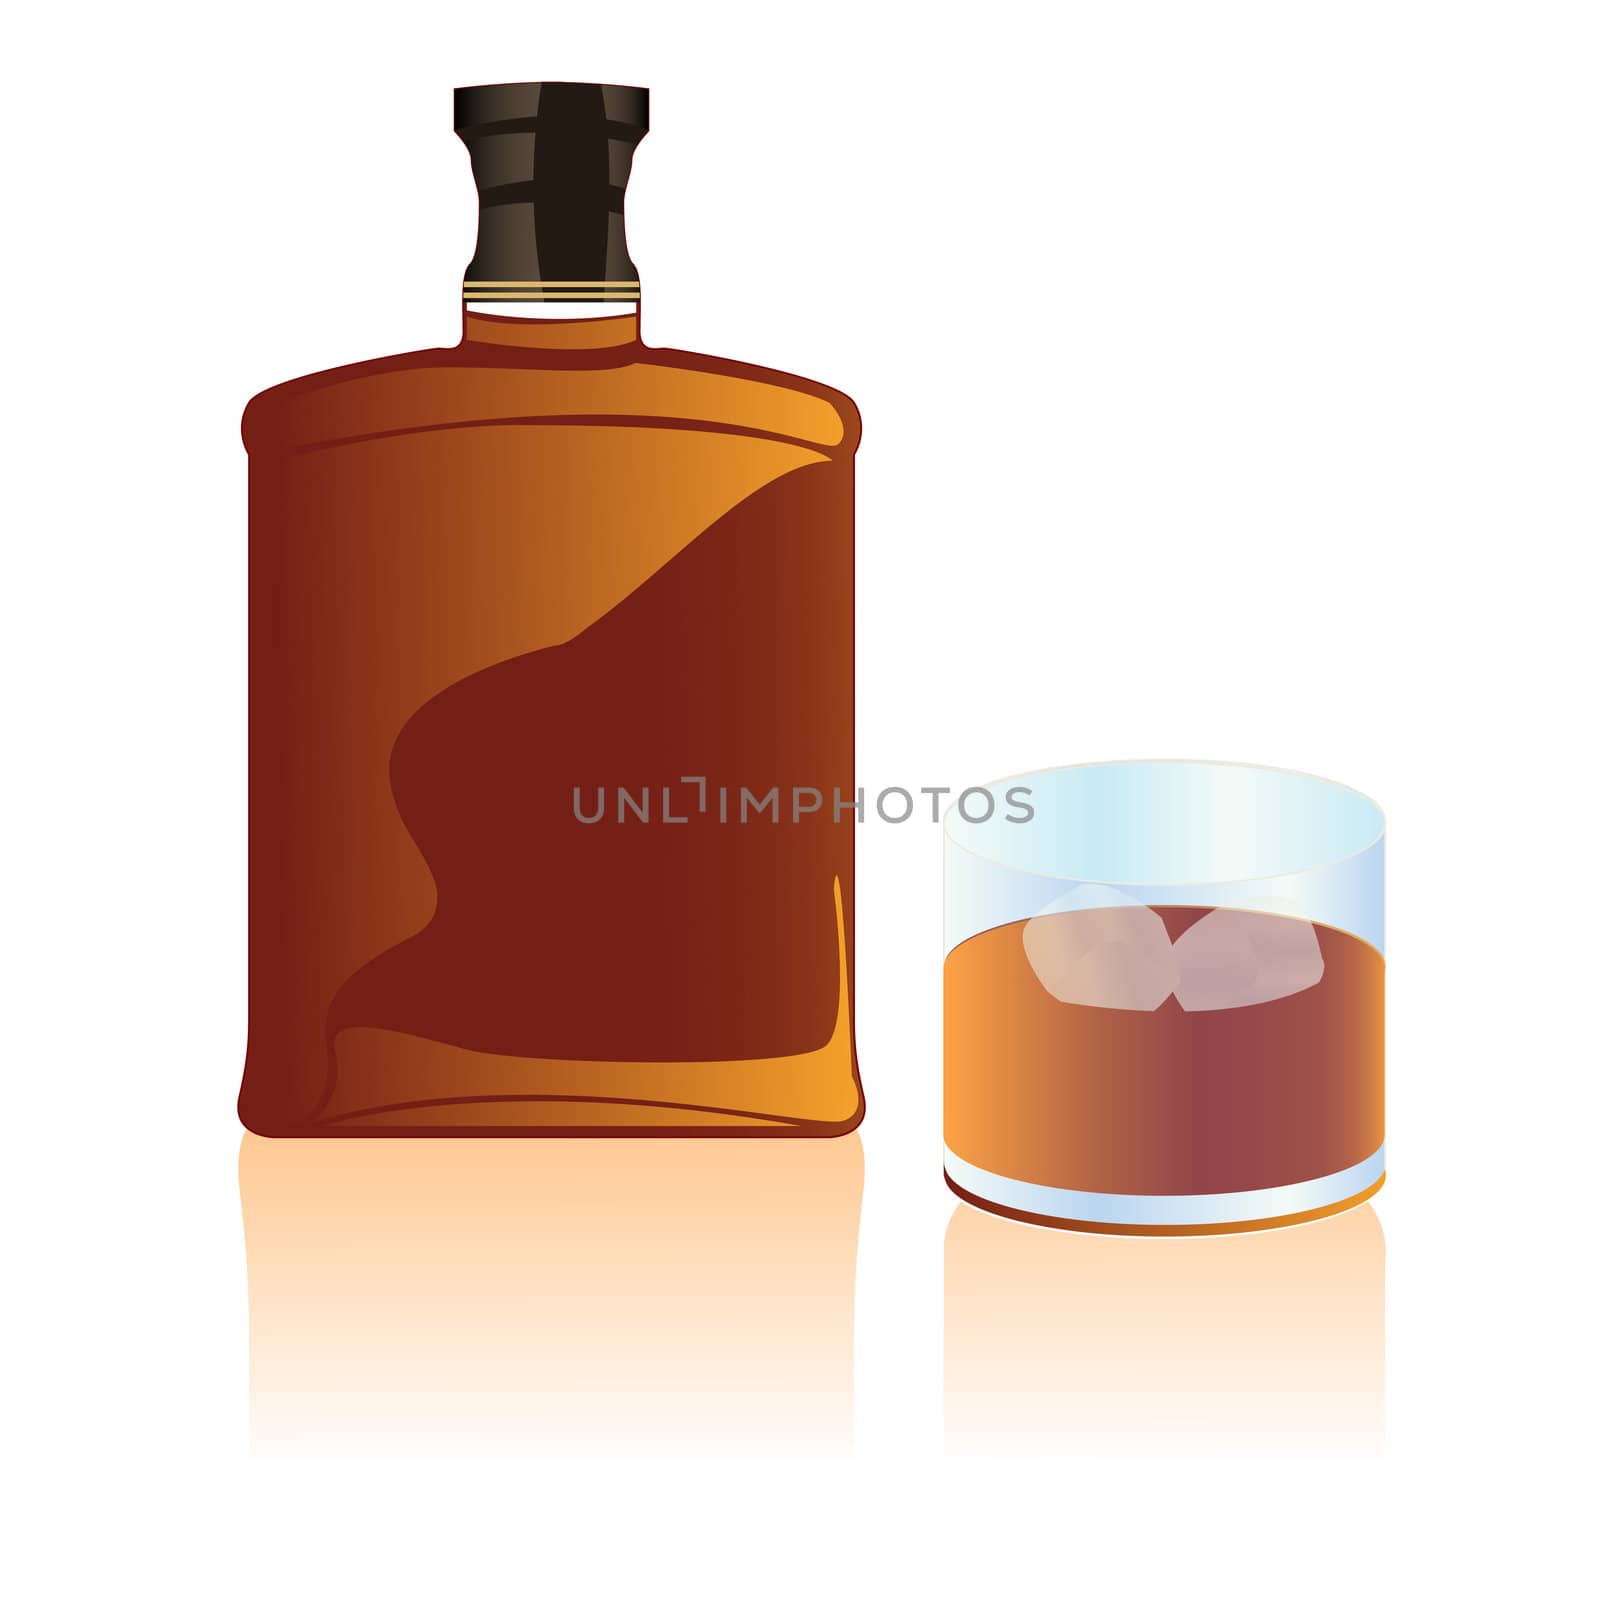 Full scotch/whiskey bottle and glass